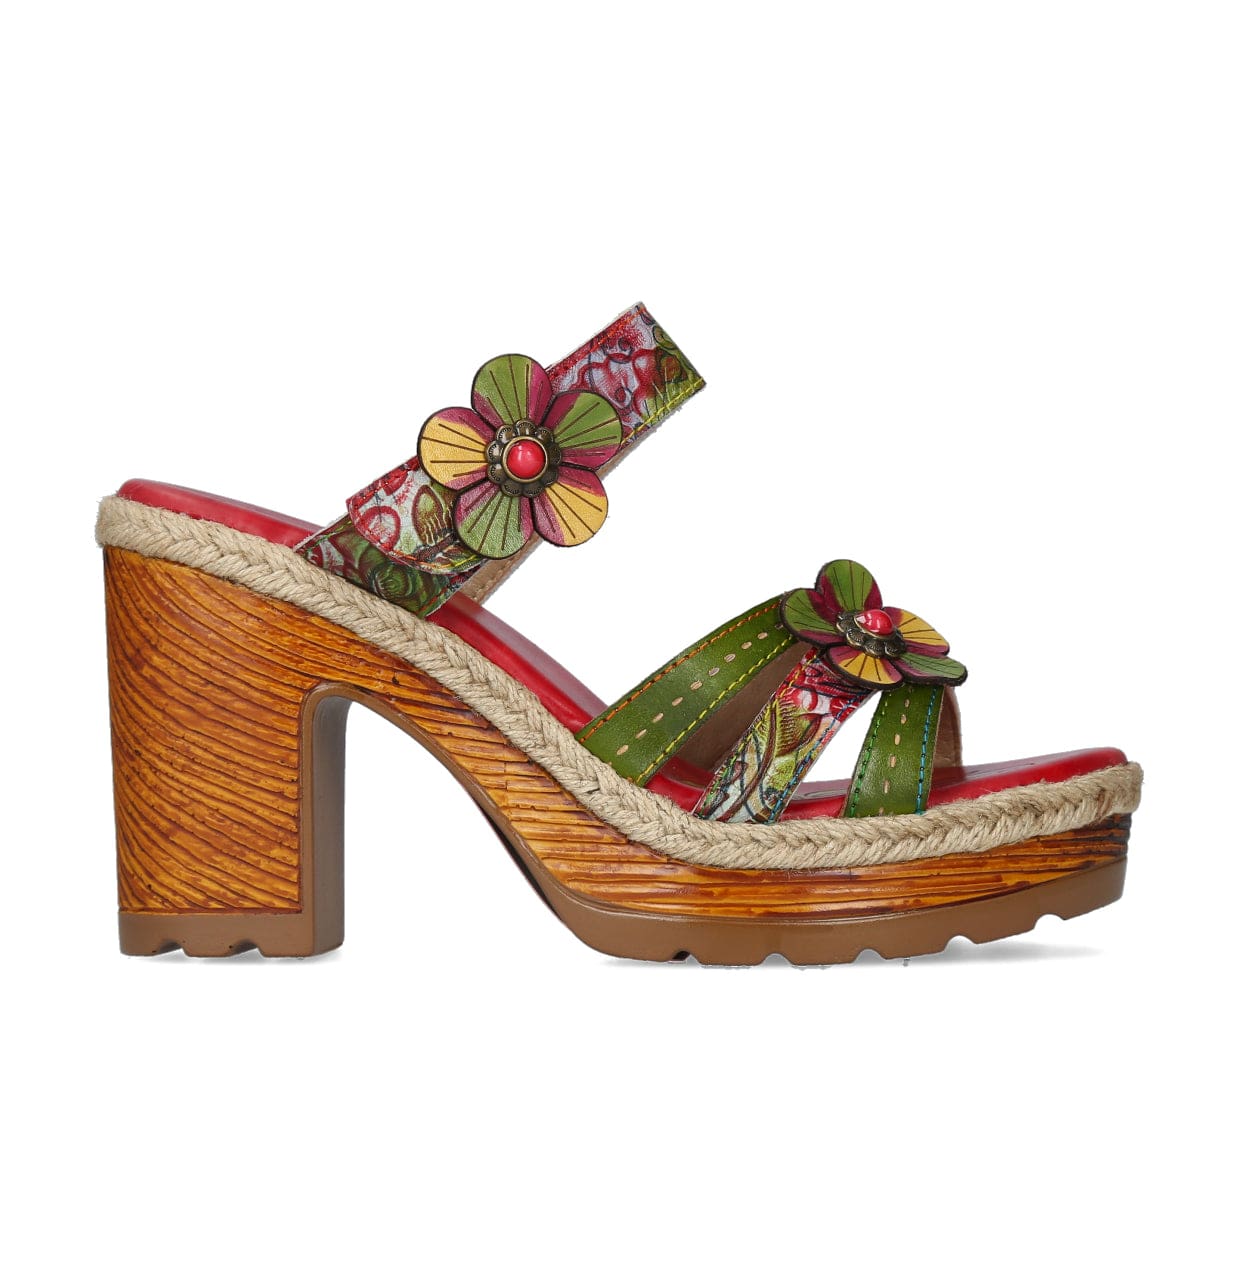 JACAO 16 shoes - 35 / Red - Mule